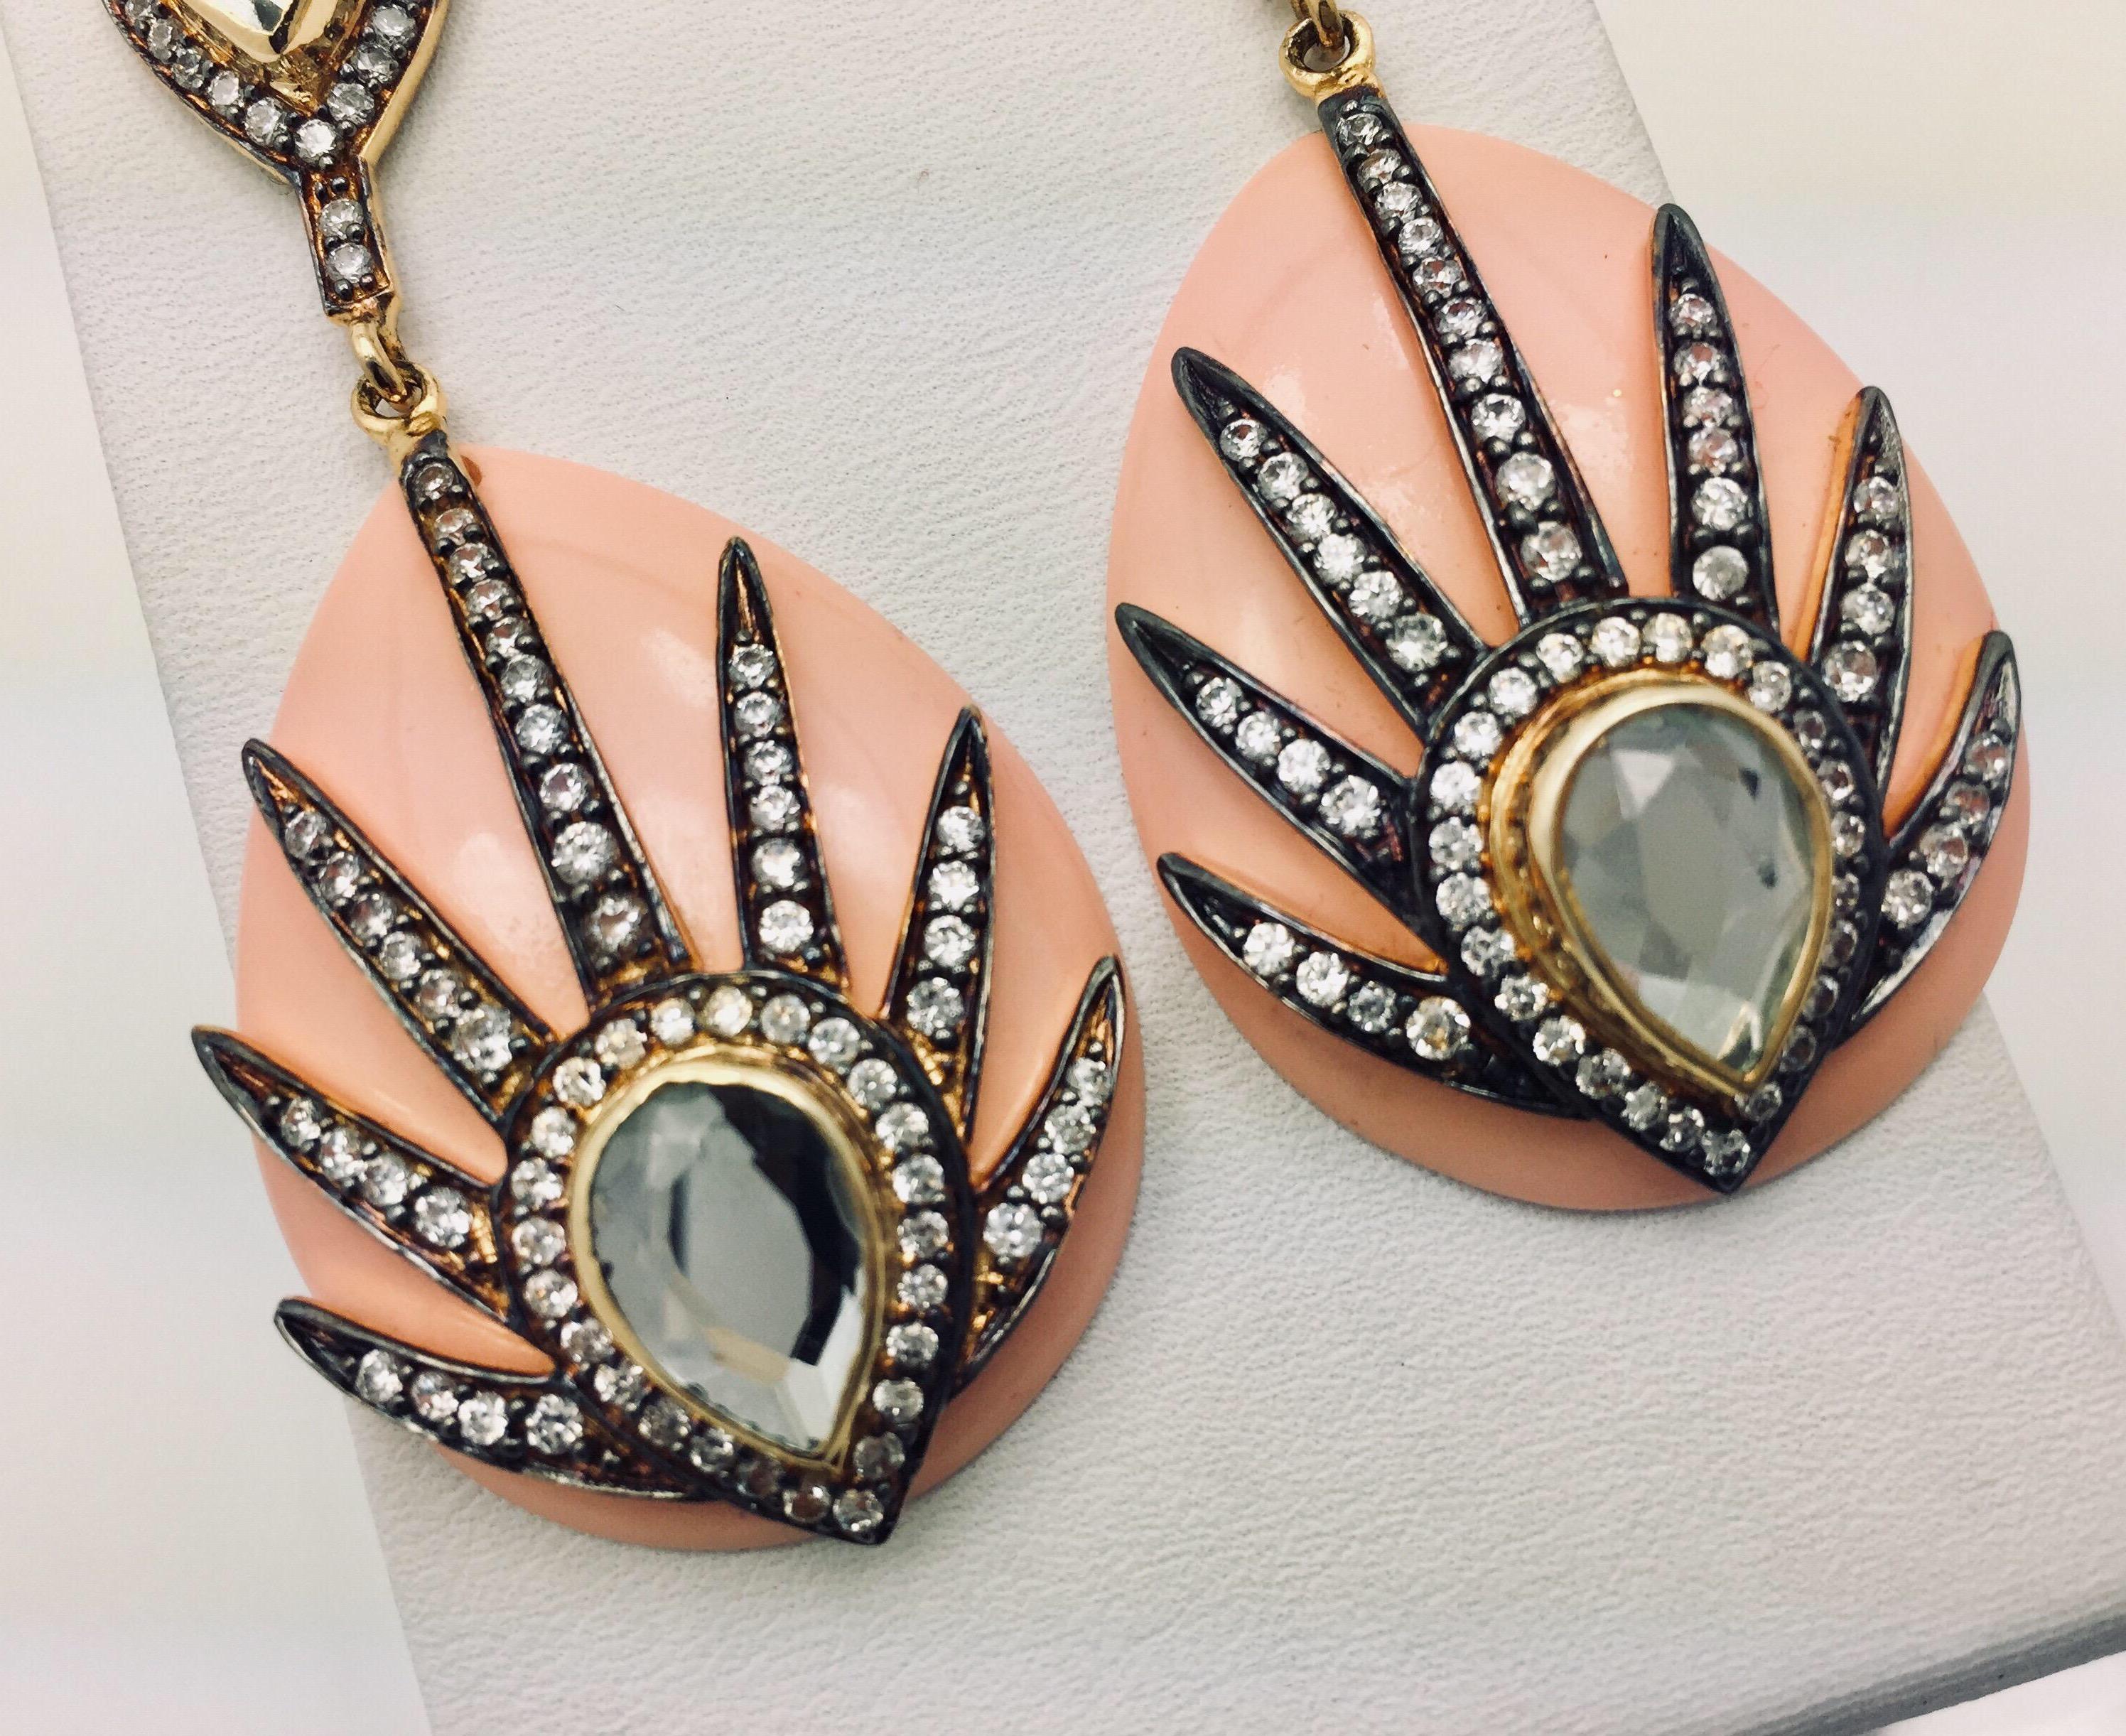 Pair these gold, peach and CZ Mohawk earrings with jeans, a sundress or your favorite evening attire... whatever you choose, be prepared for the many oohs' and ahhs these gorgeous earrings are sure to evoke! The beautiful peach colored background